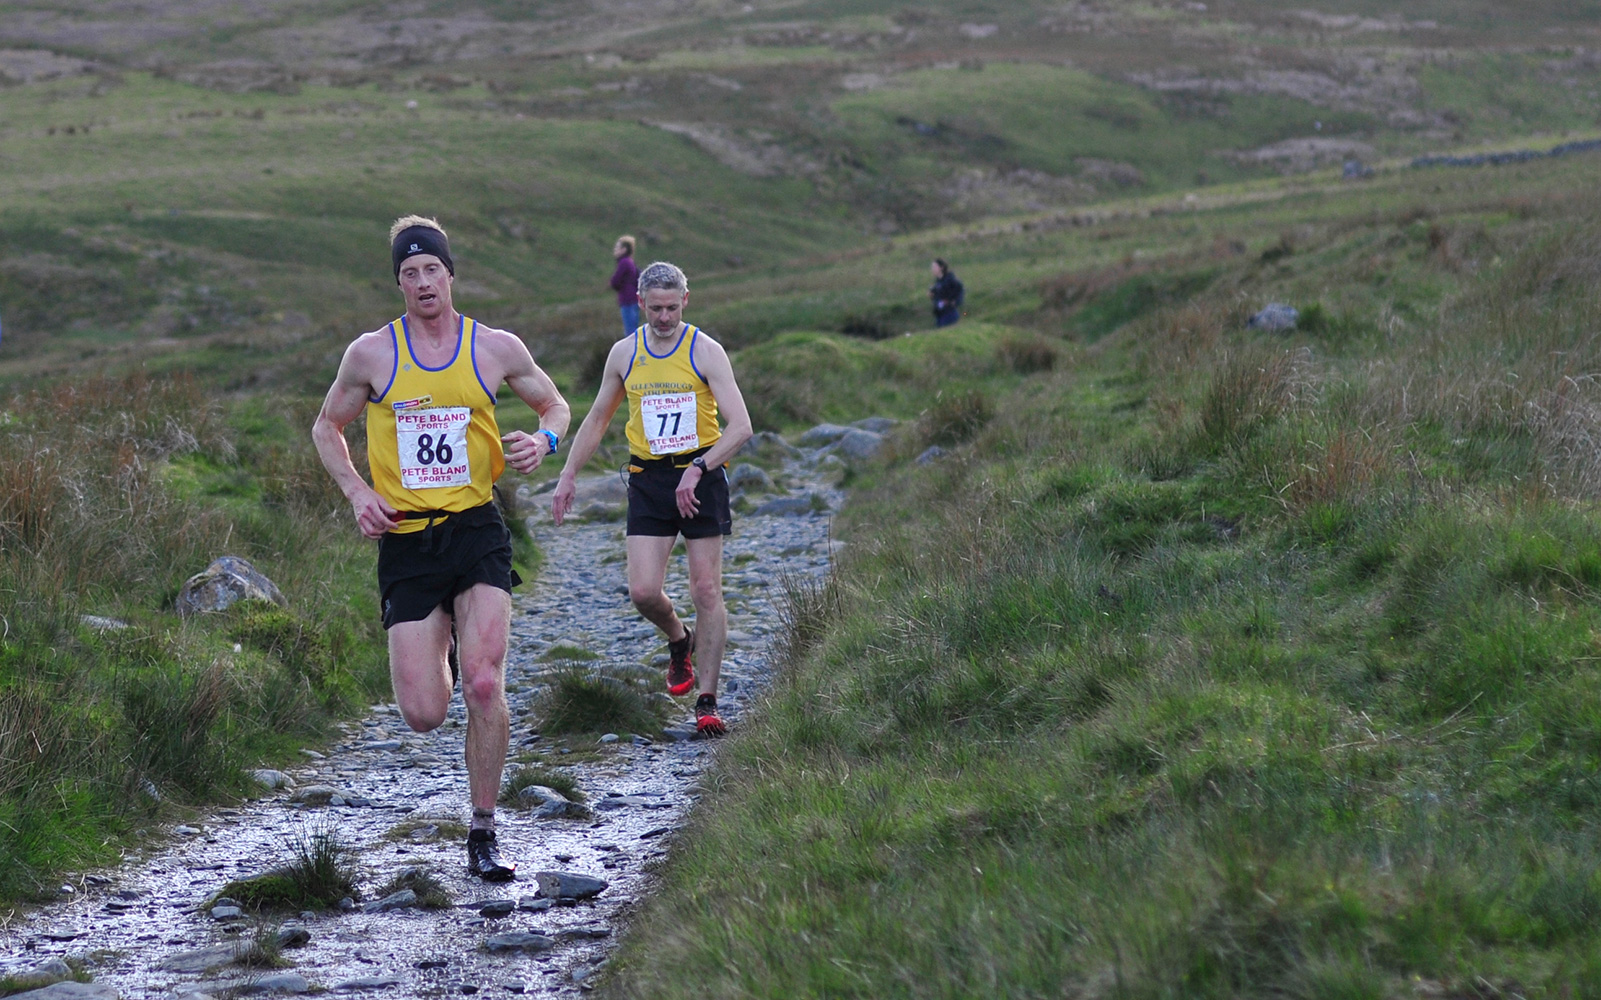 A 7.6 mile circuit over Blencathra from Mungrisdale in Cumbria. This is Ricky Lightfoot of Ellenborough winning the 2015 race, though he failed to beat his own course record of 58min 29sec set in 2009.